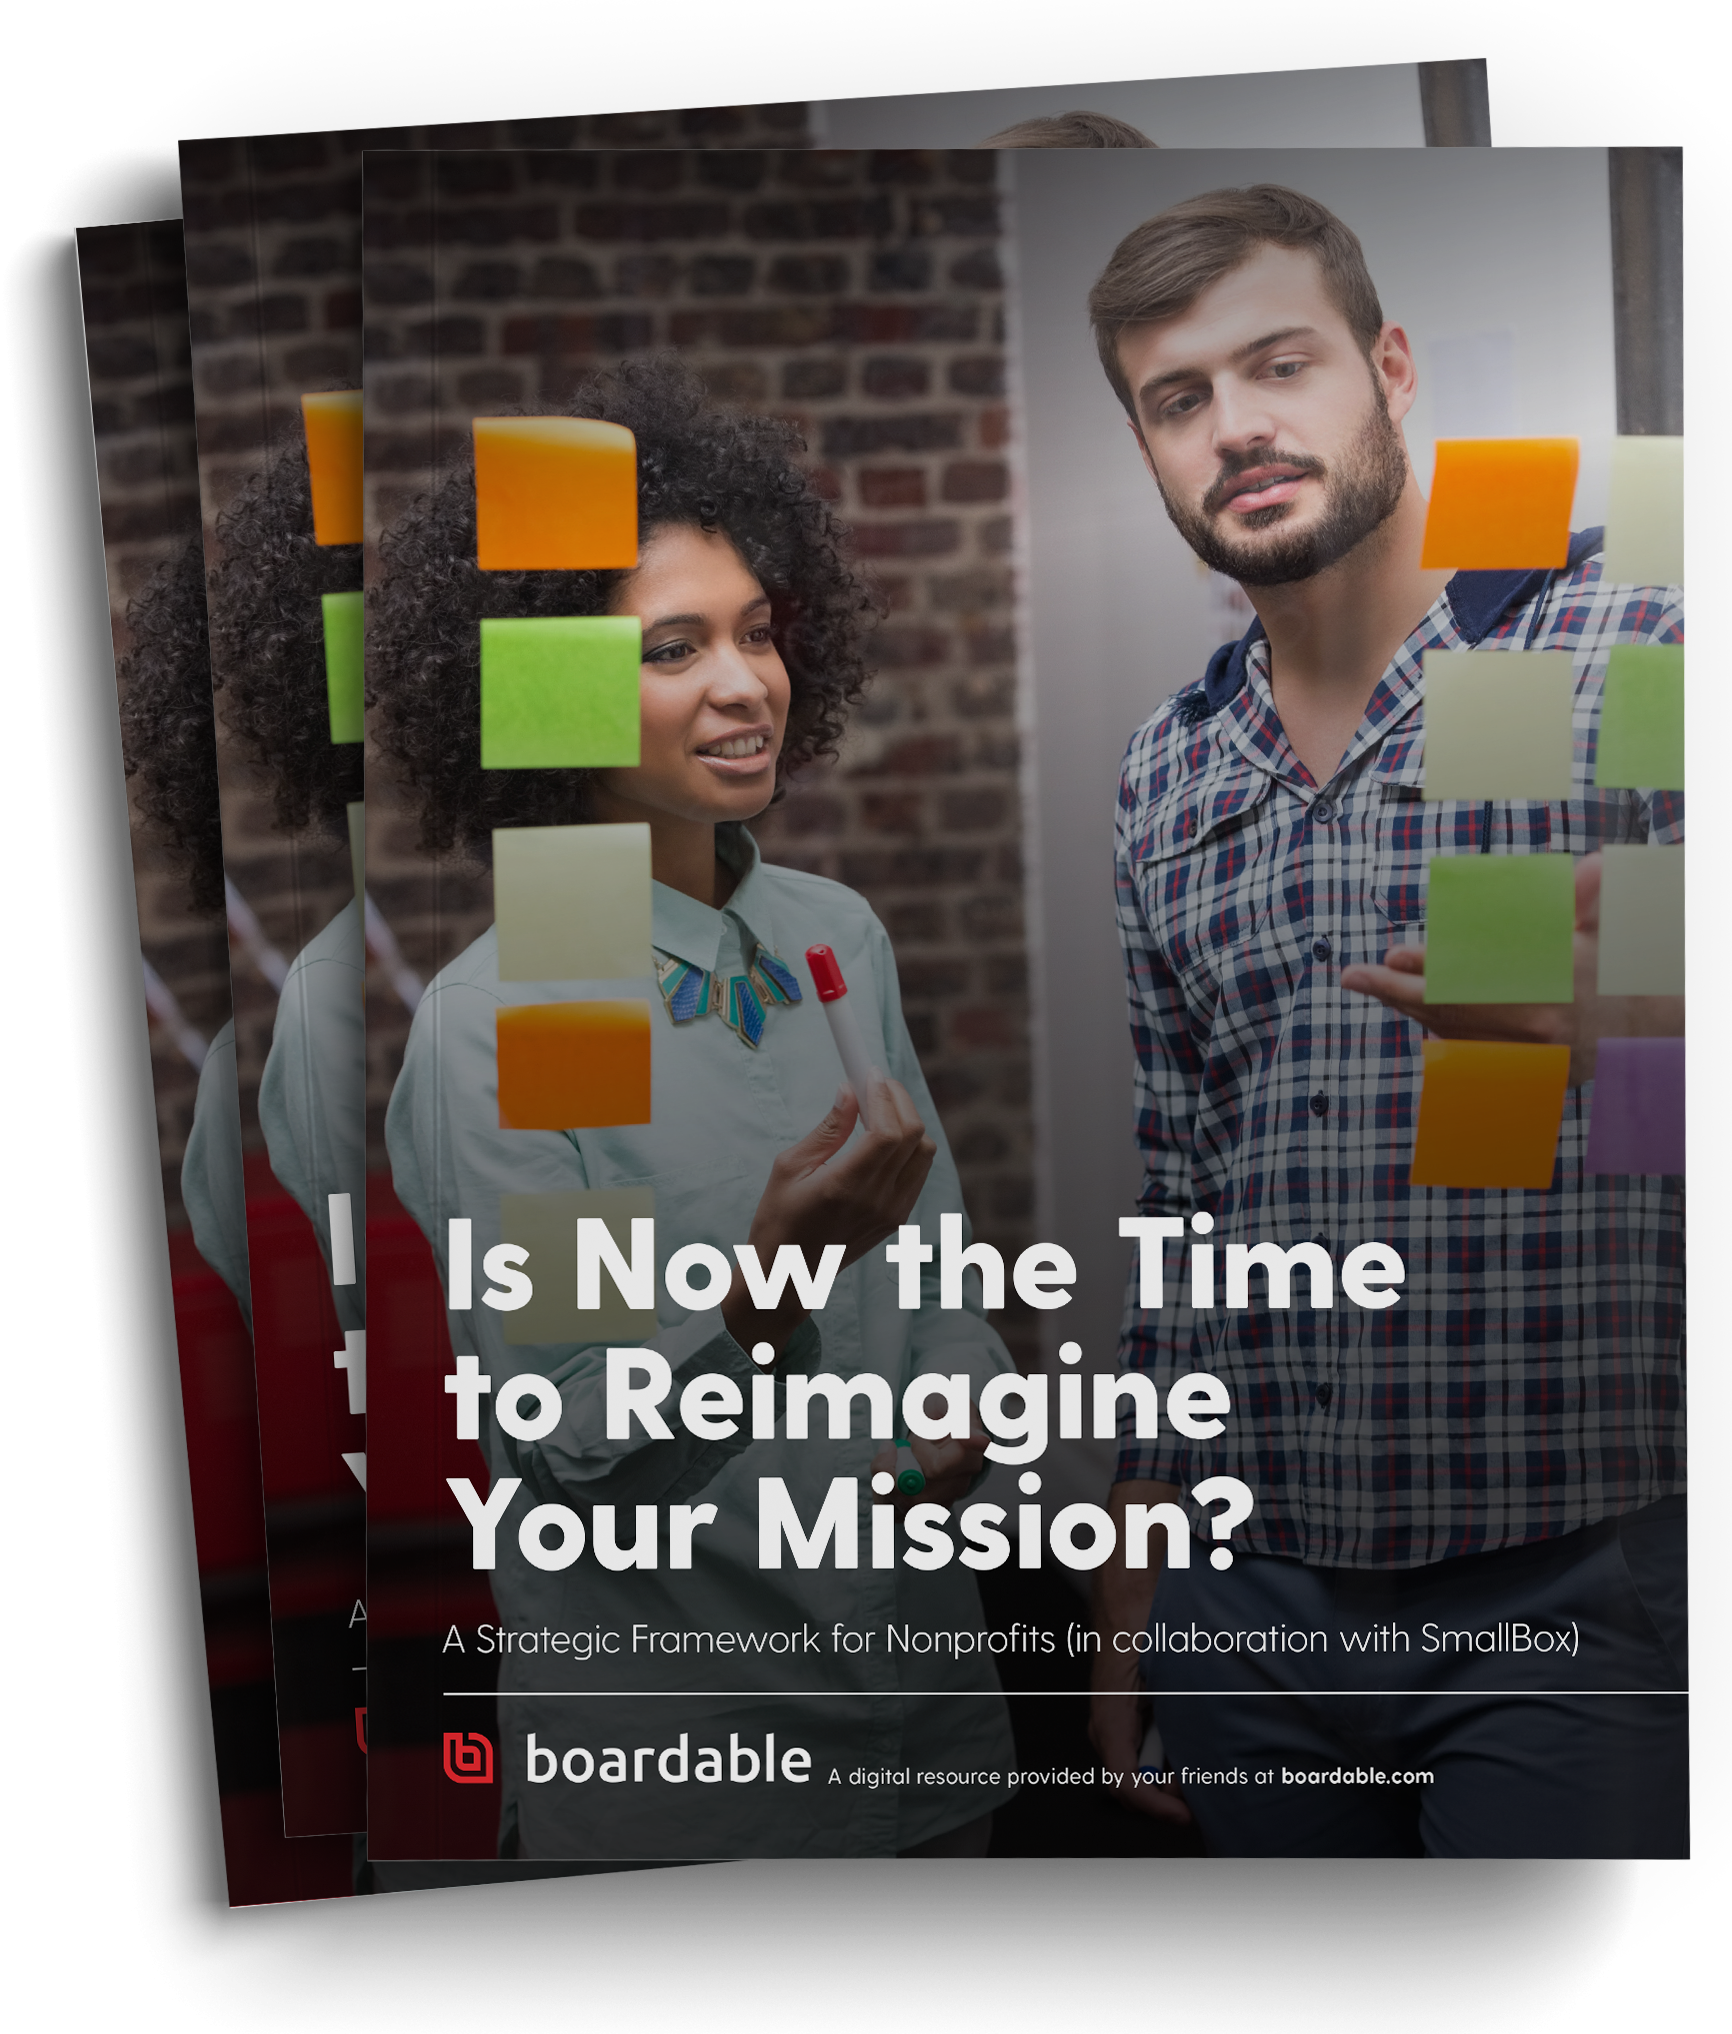 Download the “Is It Time to Rethink Your Mission?” Ebook.